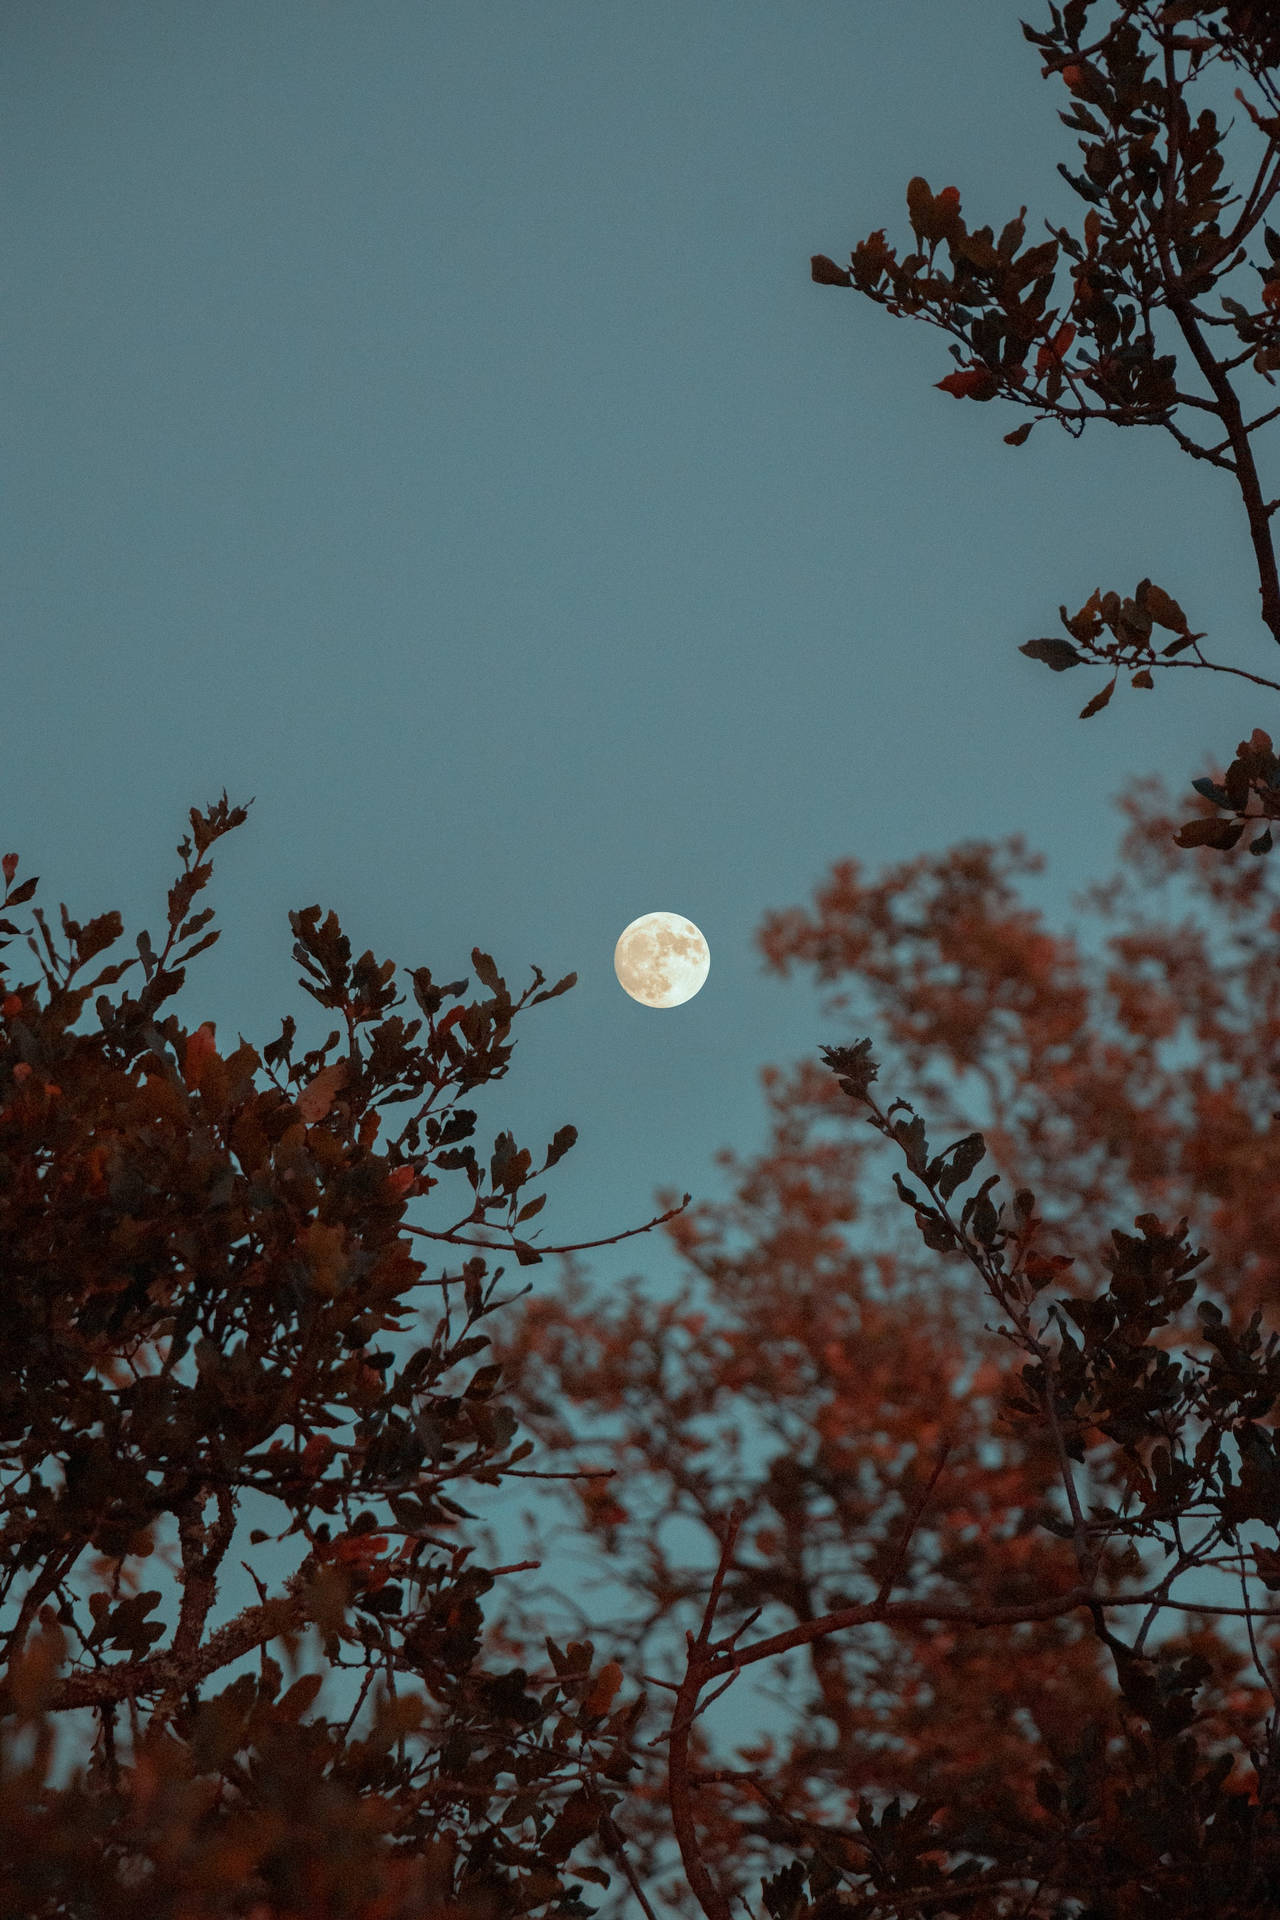 Luna Photograph With Trees At Night Background